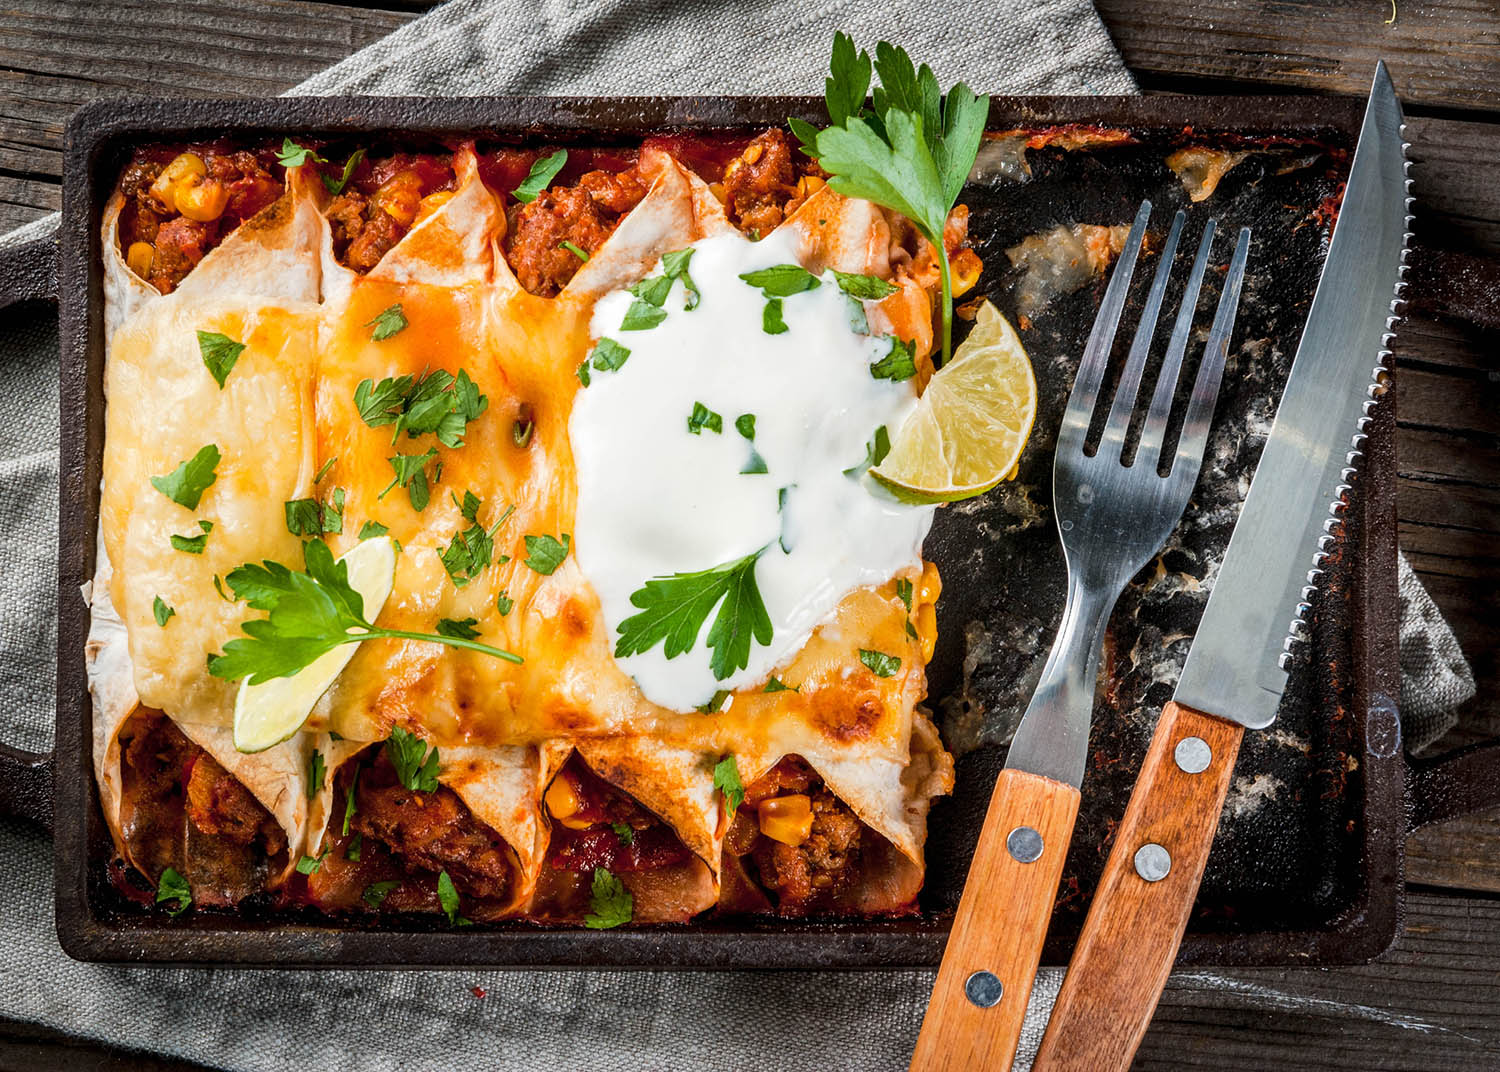 Mexican food. Cuisine of South America. Traditional dish of spicy beef enchiladas with corn, beans, tomato. On a baking tray, on old rustic wooden background. Top view